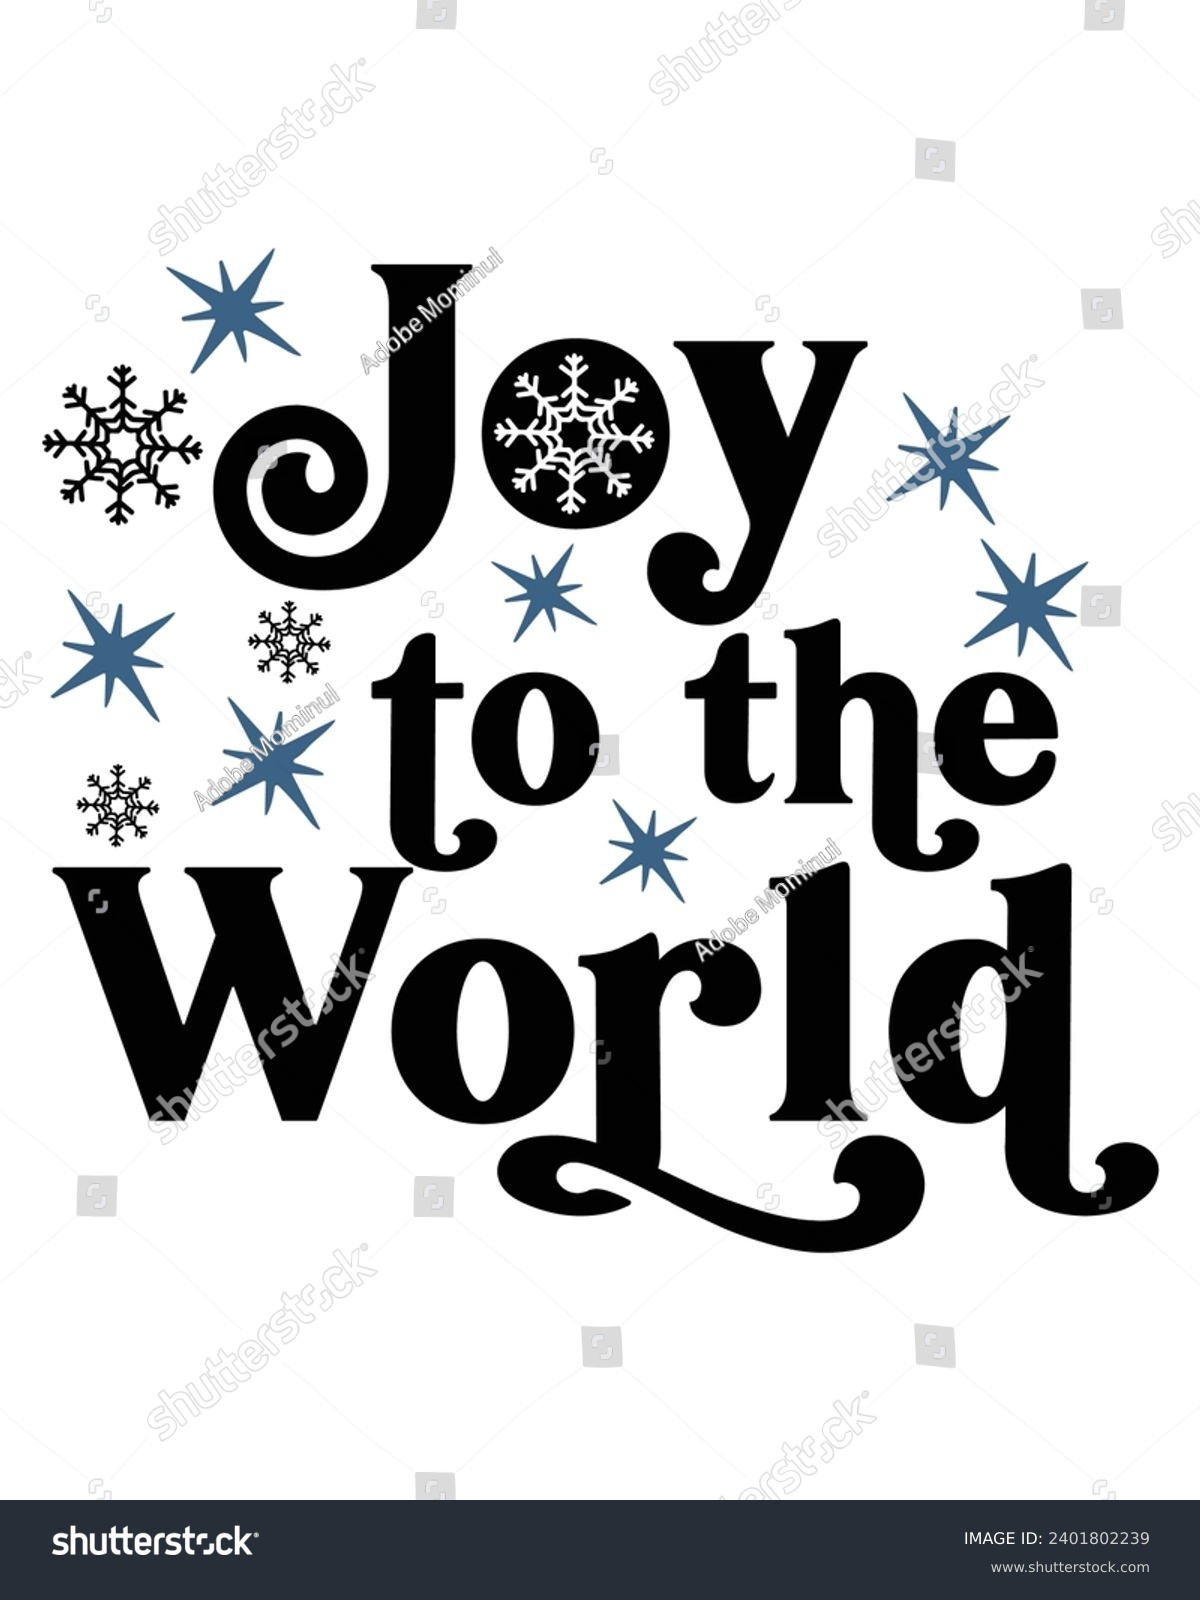 SVG of Joy To The World Svg,Winter Svg,Christmas Svg,Funny Holiday Quote,New Year Quotes,Winter Quotes,Retro Christmas T-shirt, Funny Christmas Quotes, Merry Christmas Saying,Retro,Commercial Use svg